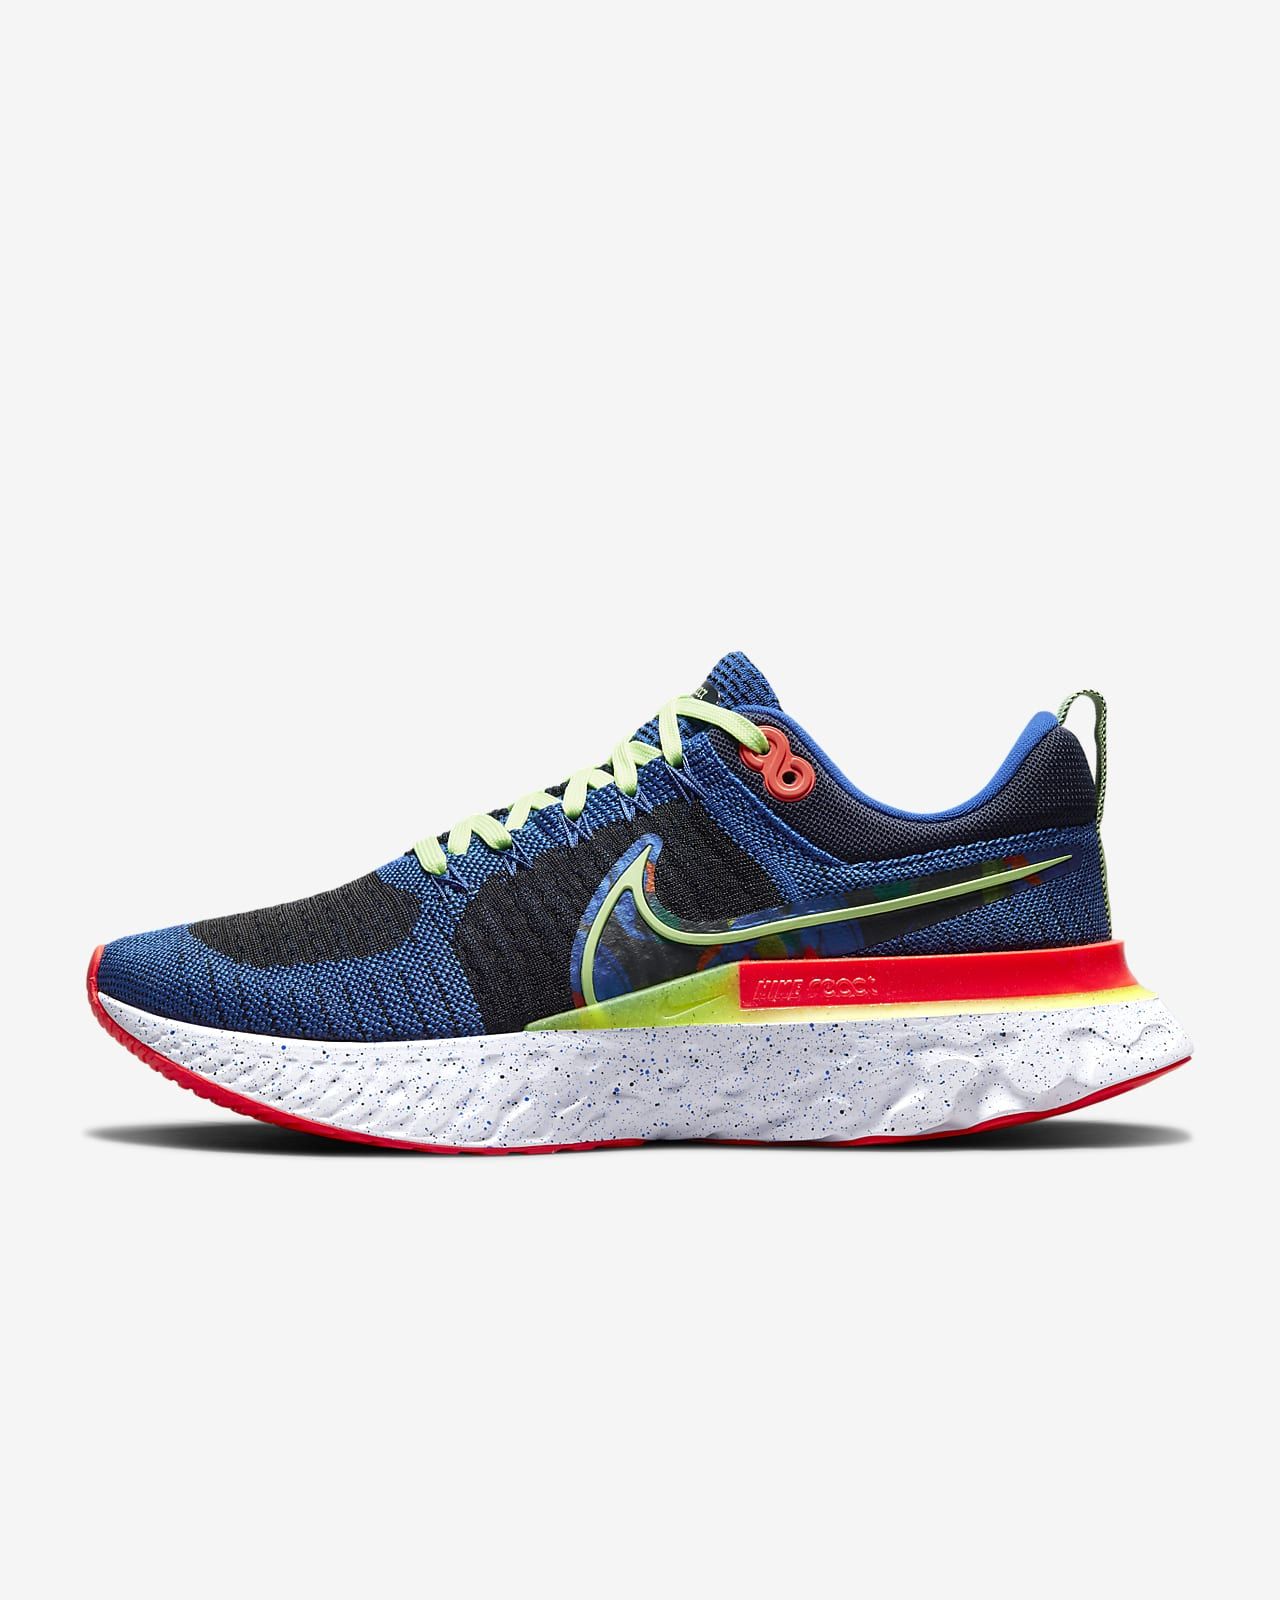 Nike React Infinity Run Flyknit 2 A.I.R. Kelly Anna LondonMen's Road Running Shoes$151.97$160 | Nike (US)